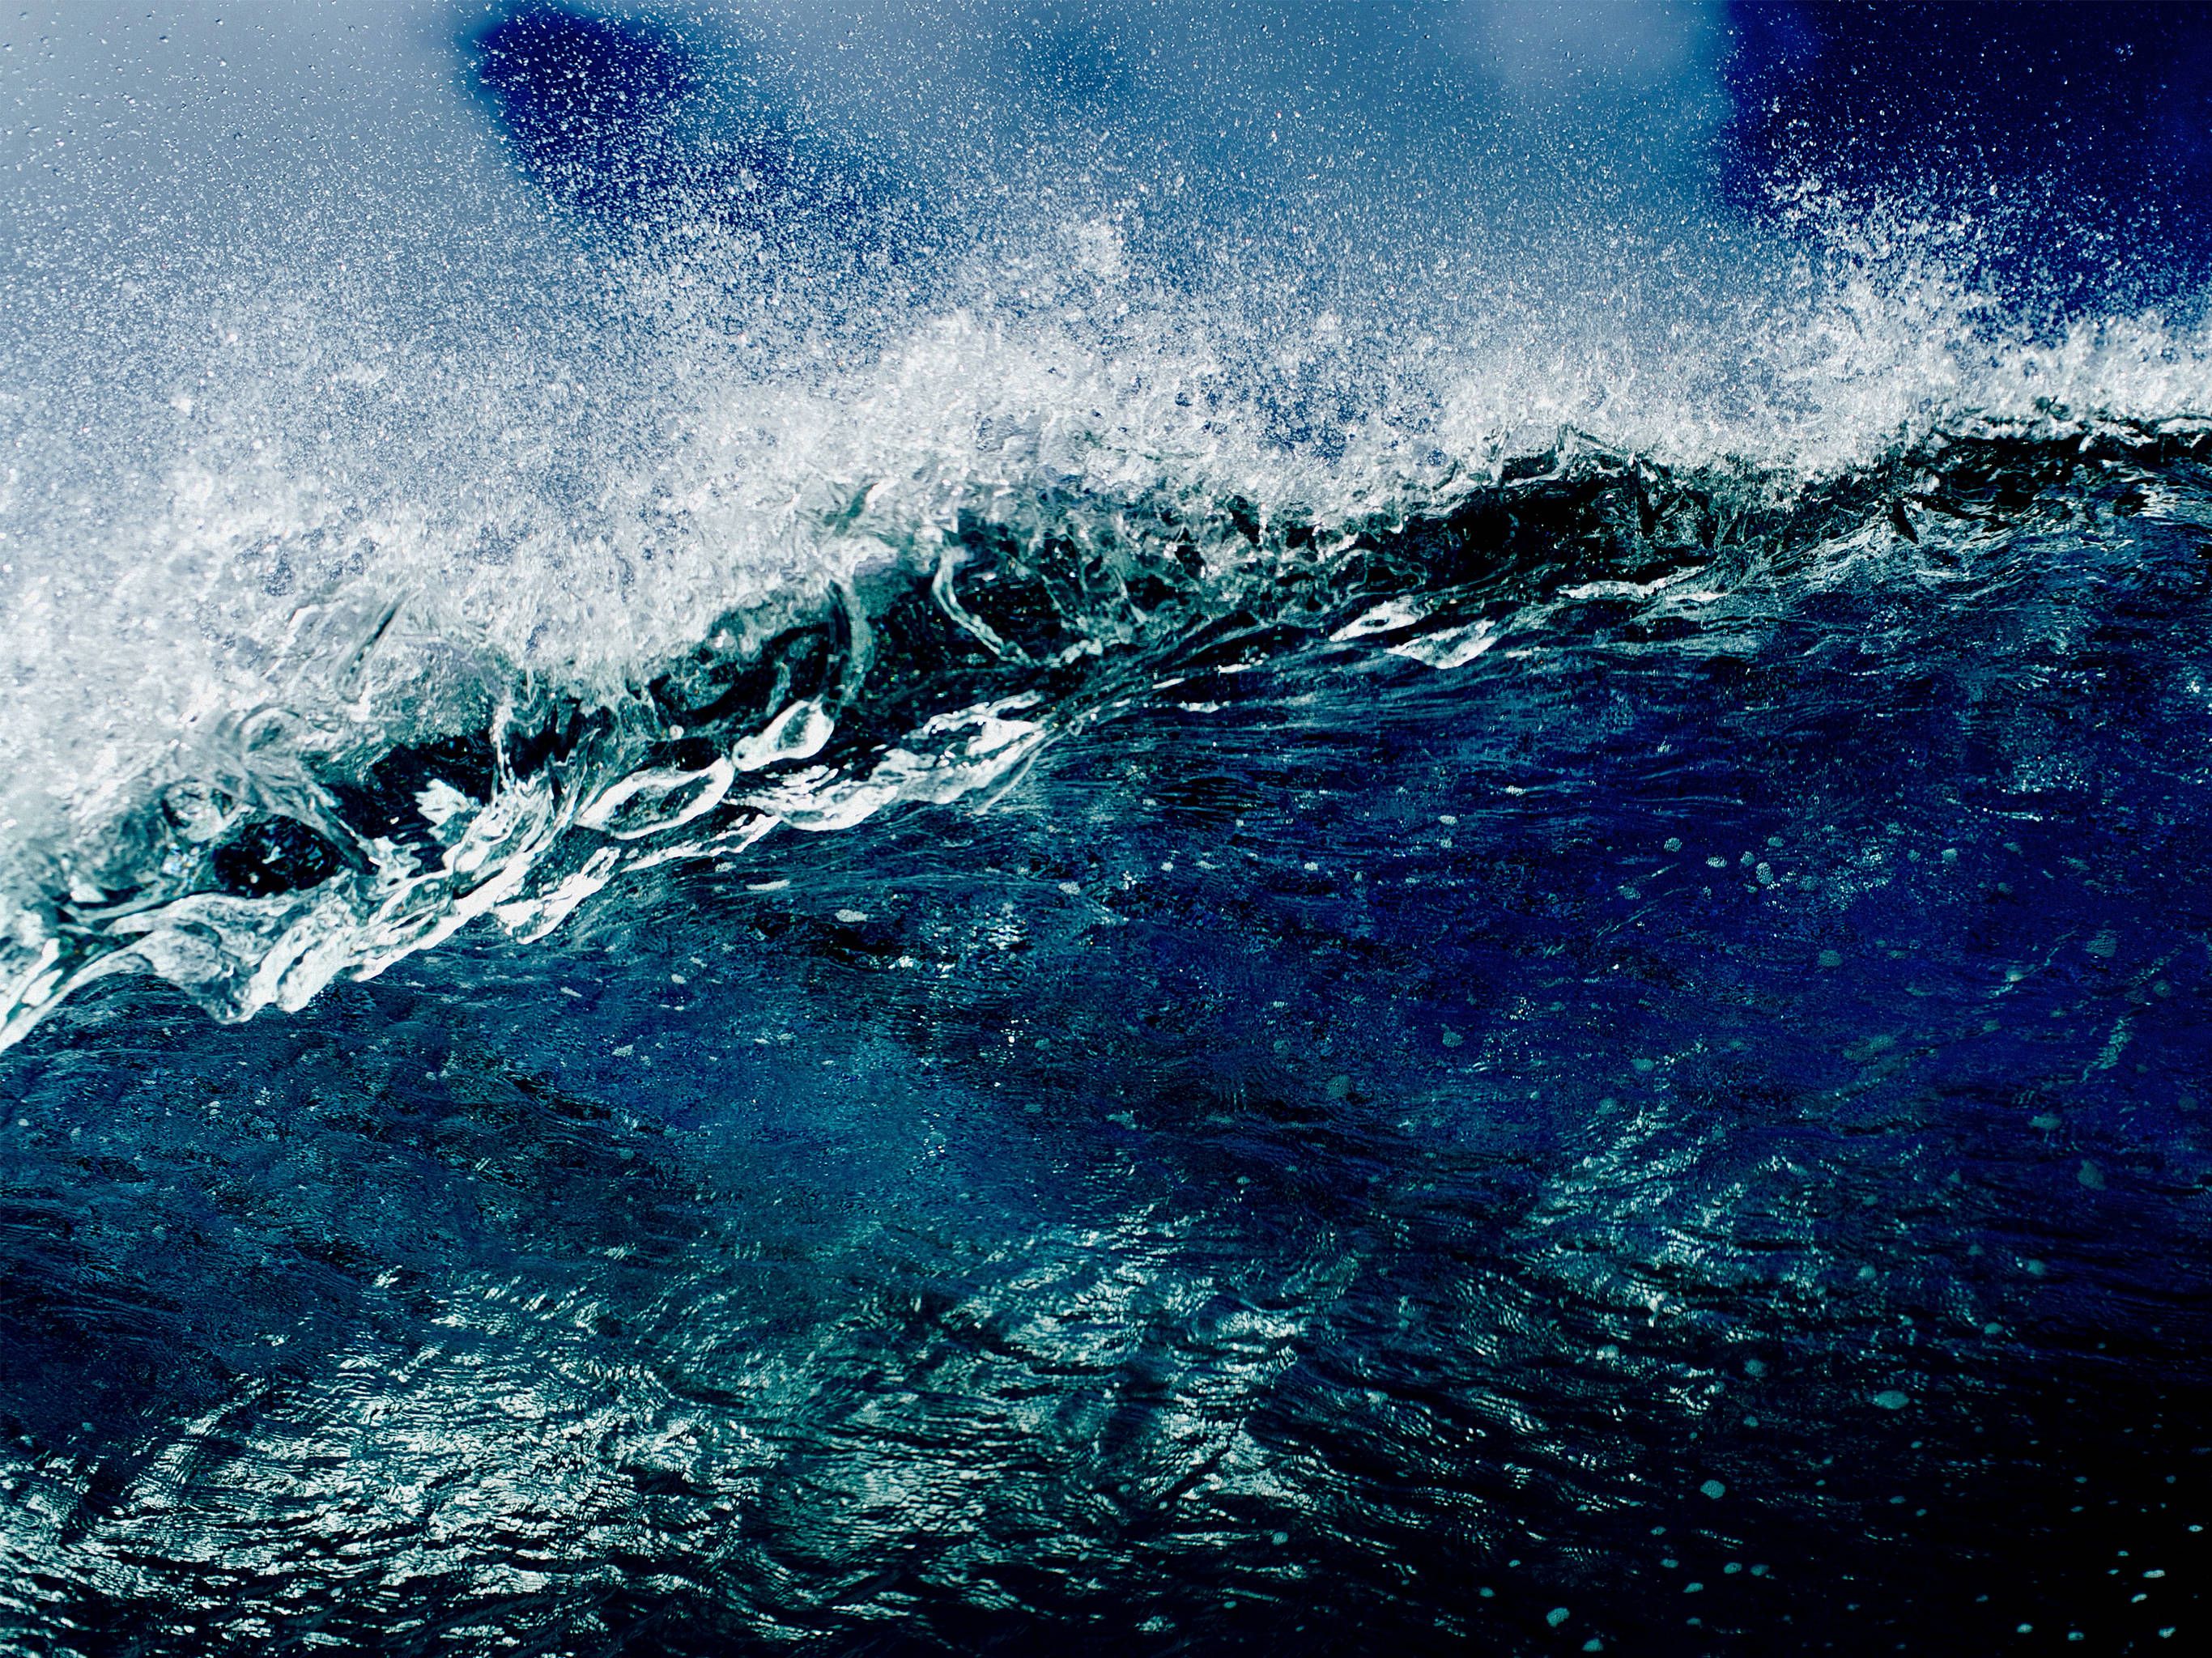 A wave crashes in the deep blue ocean - Wave